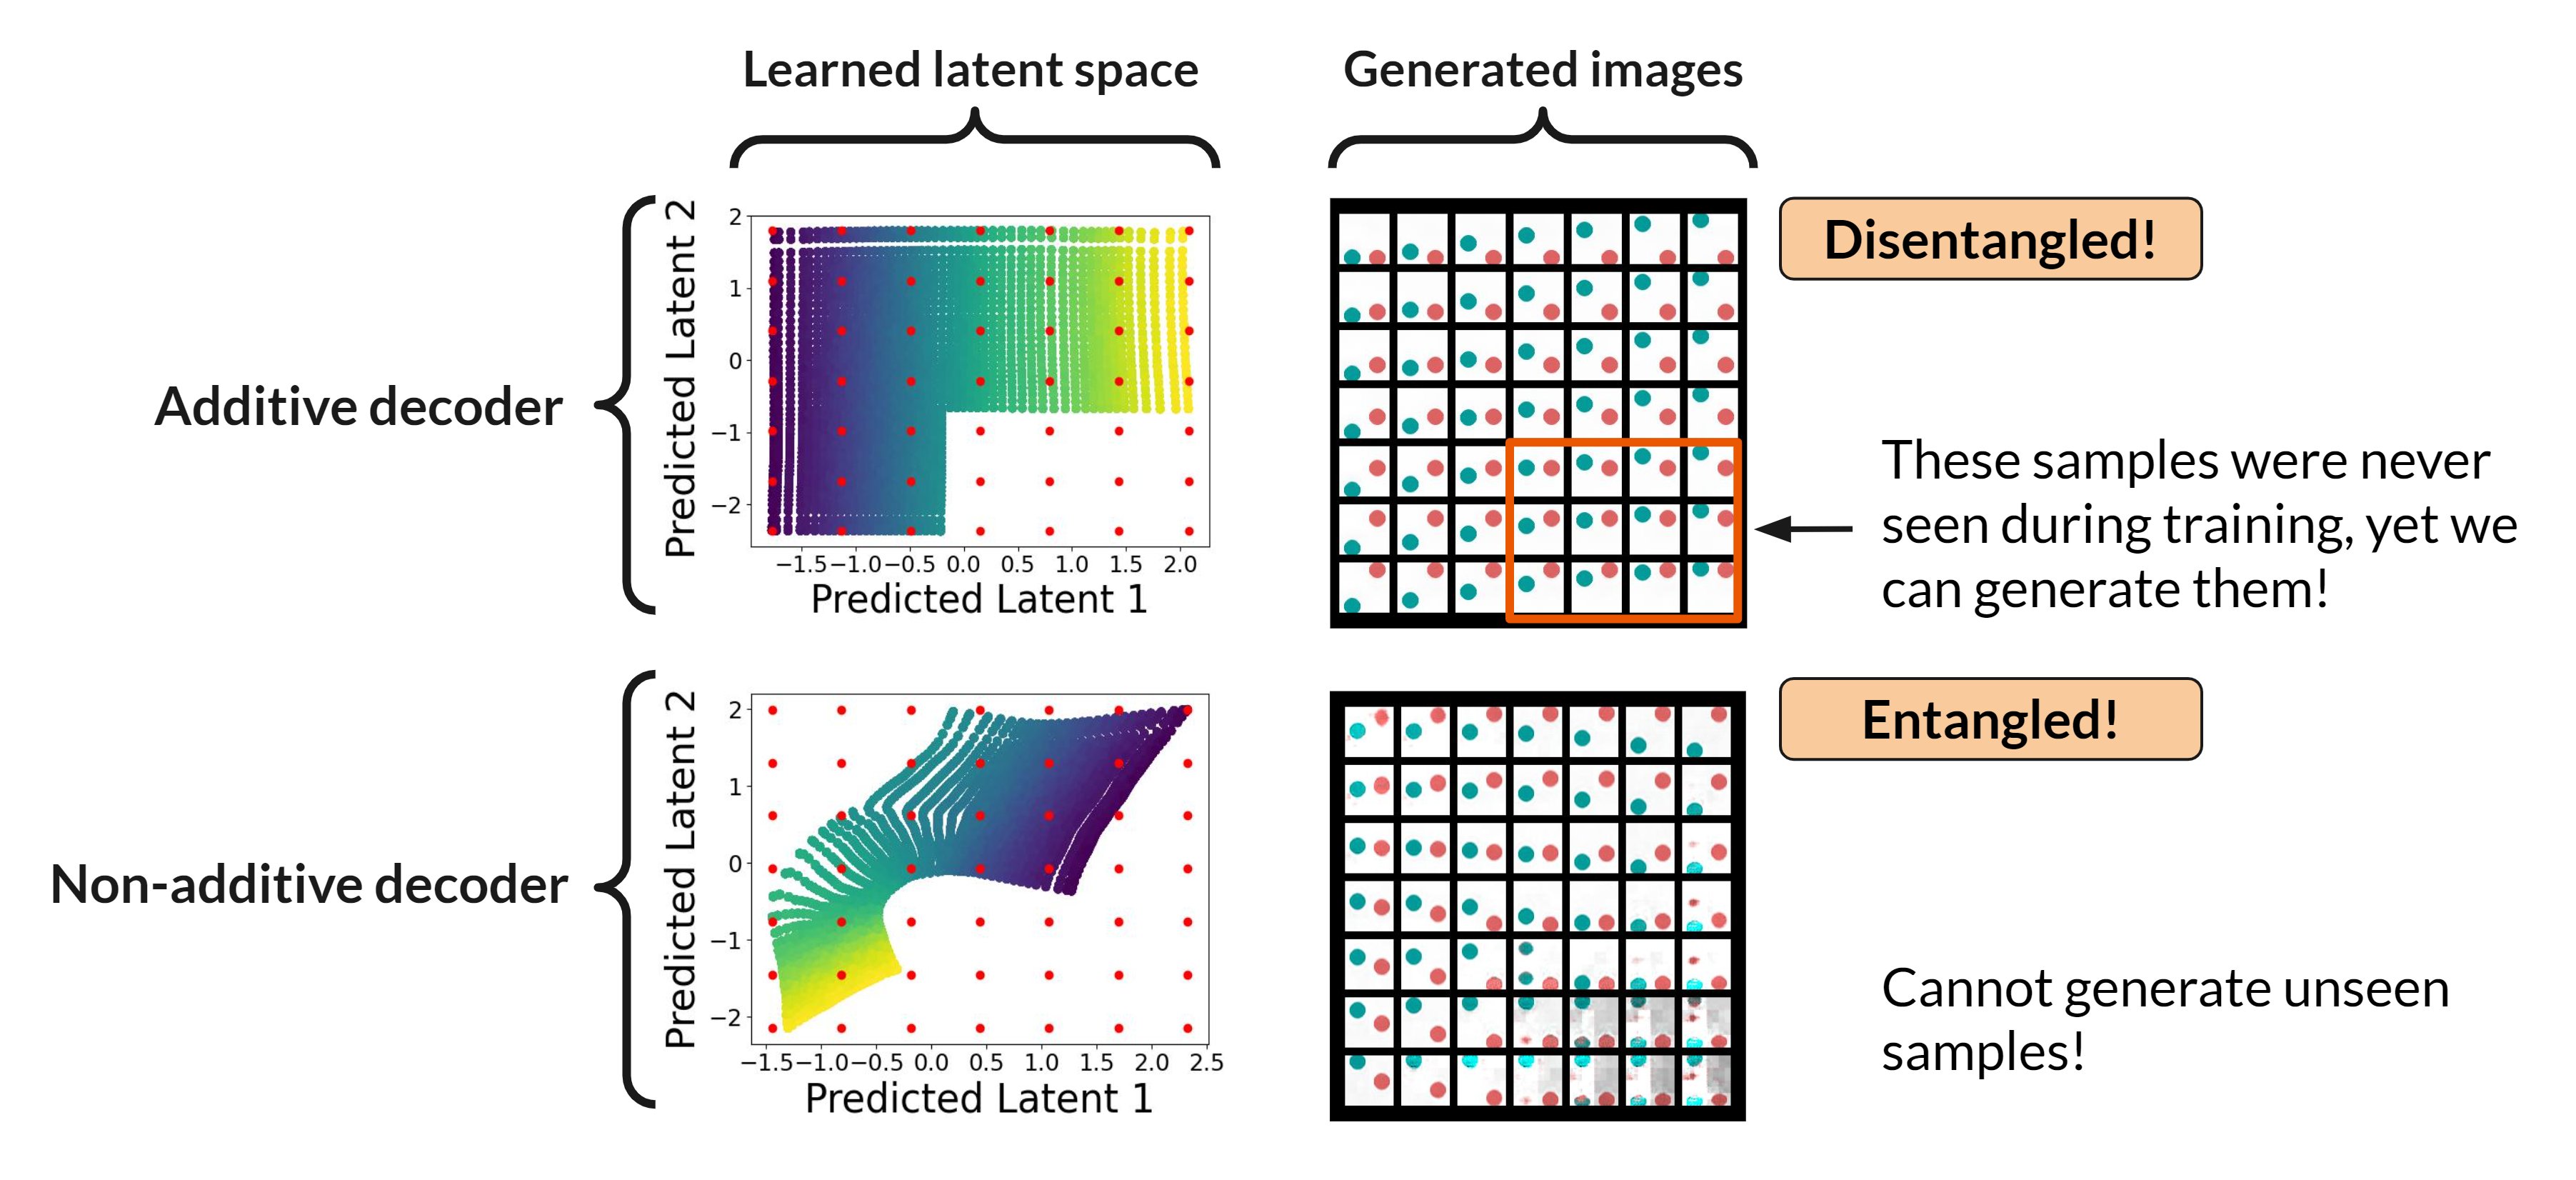 [Figure 7: The figure in the top row shows latent representation outputted by the encoder over the training dataset and the corresponding reconstructed images of the additive decoder for the ScalarLatents dataset. The figure in the bottom row shows the same thing for the non-additive decoder. The color gradient corresponds to the value of one of the ground-truth factor, the red dots correspond to factors used to generate the images, and the yellow dashed square highlights extrapolated images.]